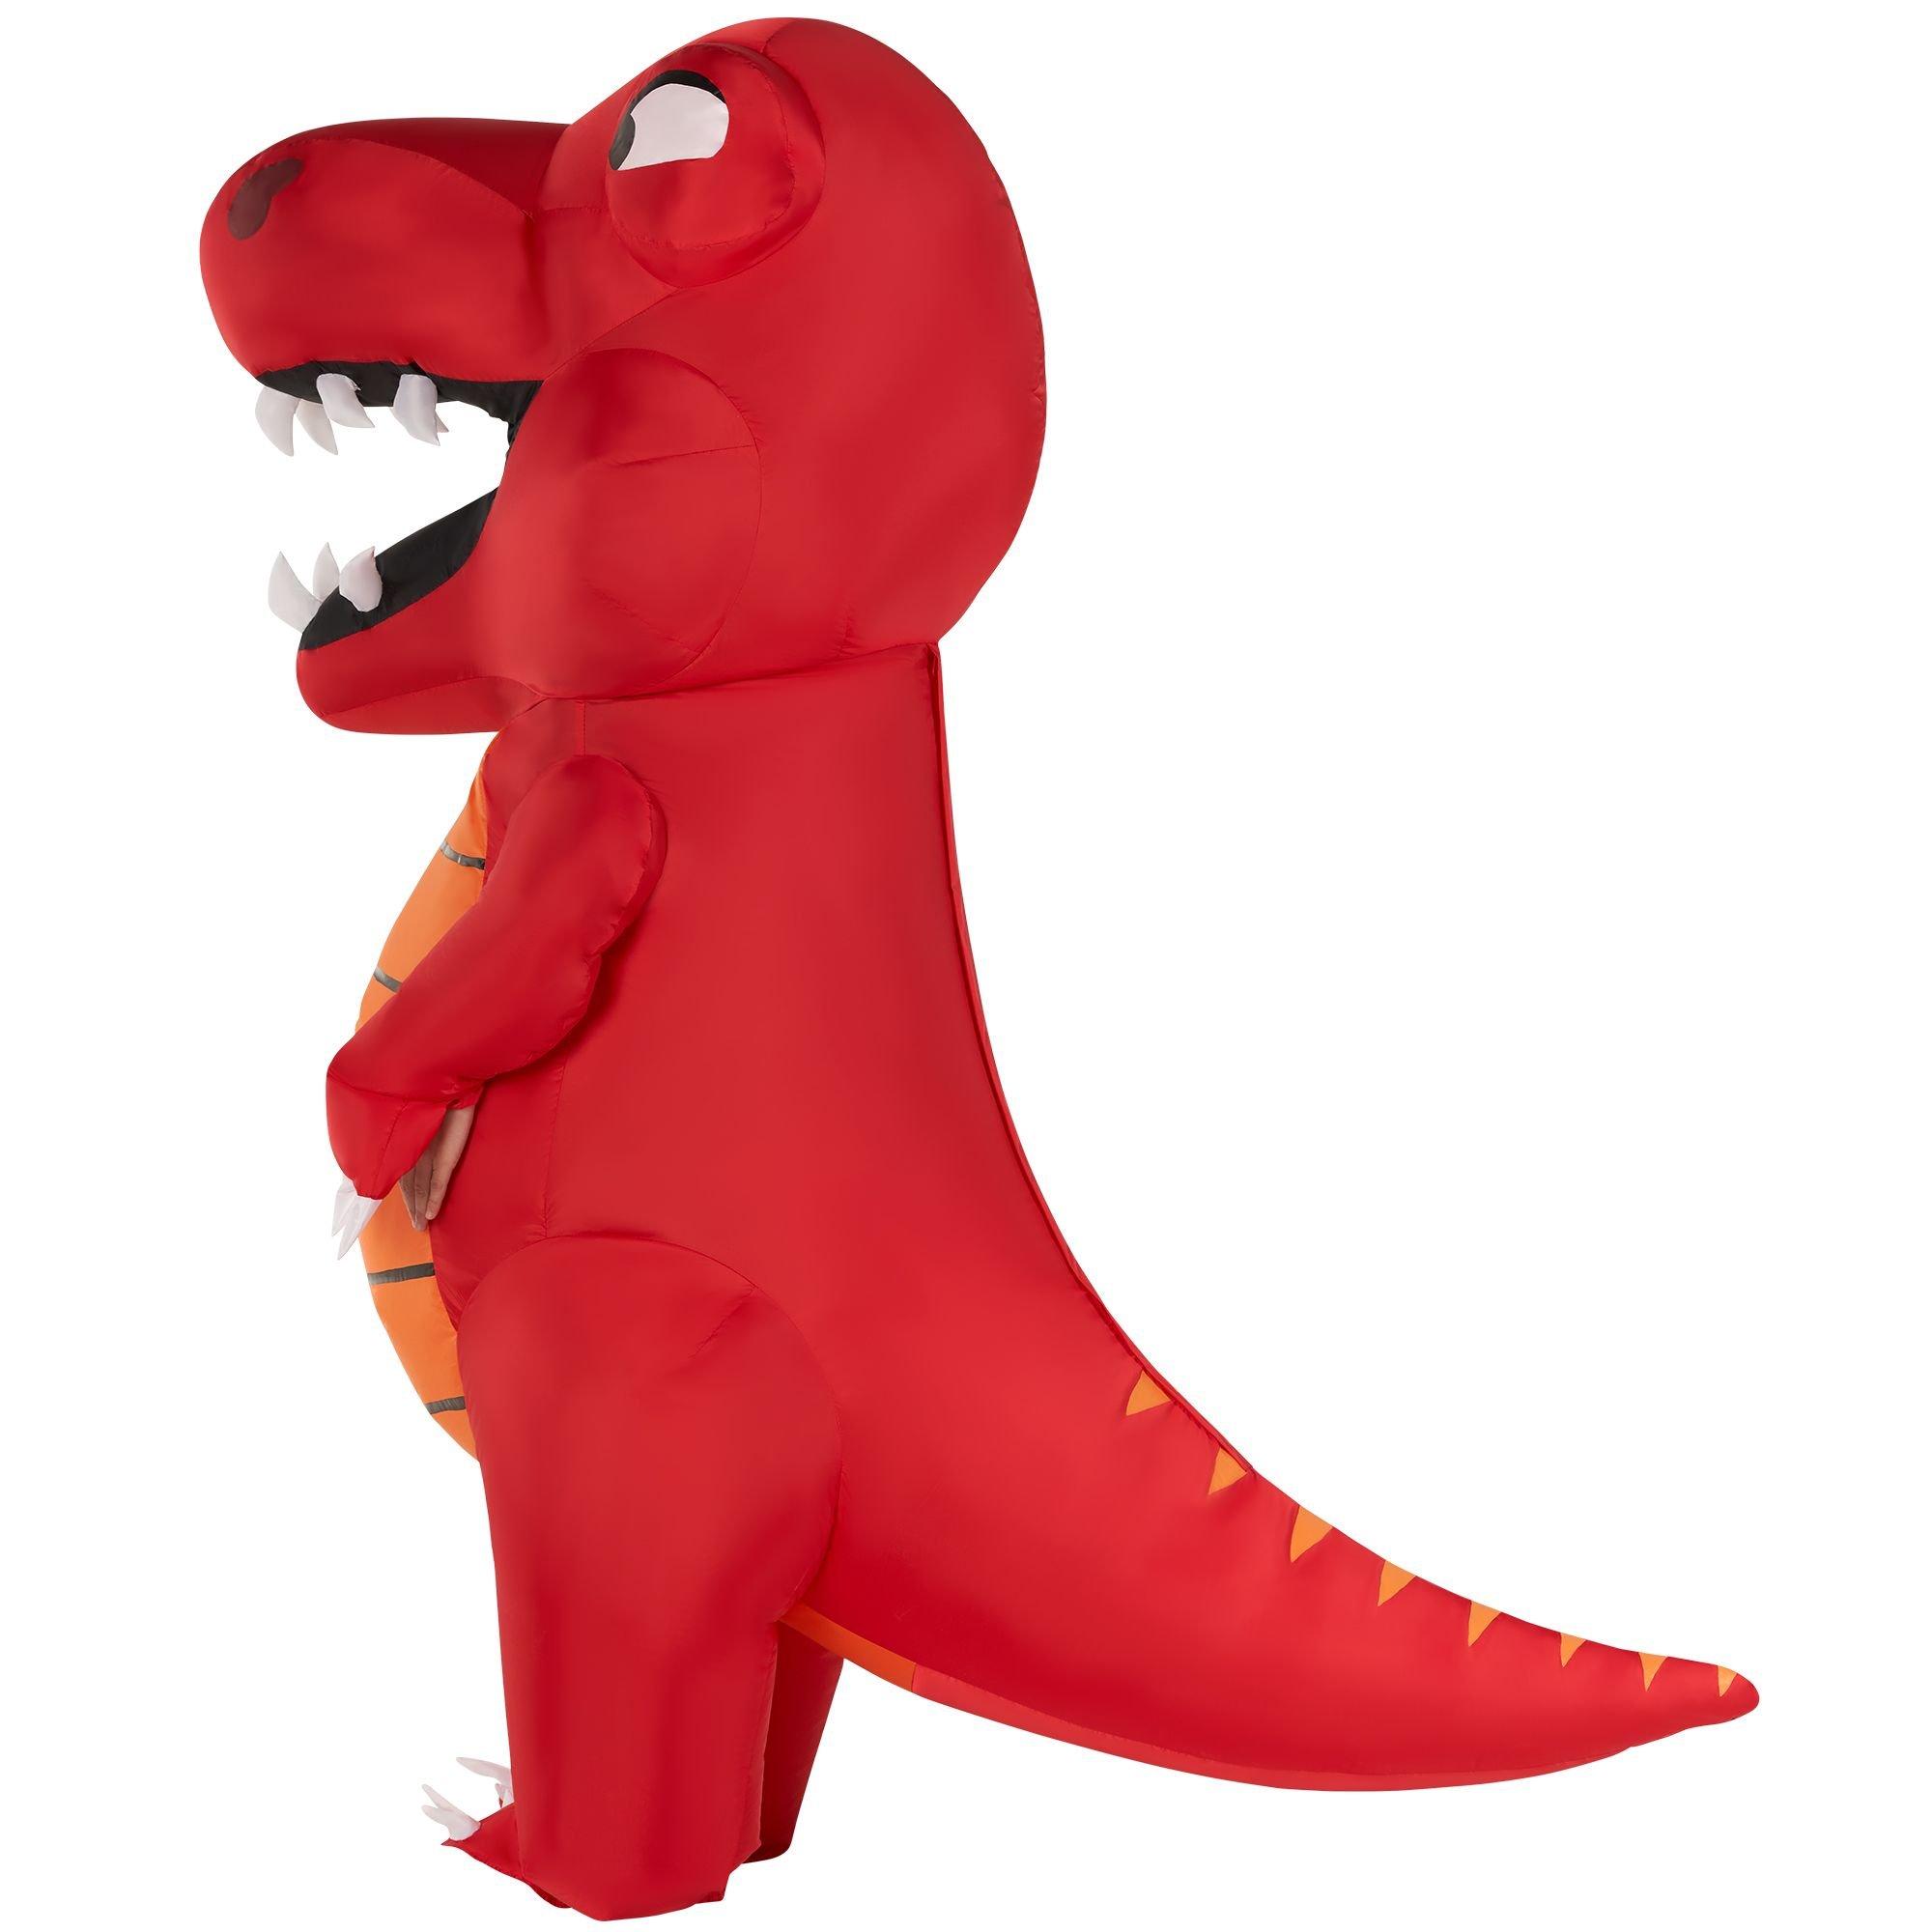 Kids' Red Dinosaur Inflatable Costume | Party City